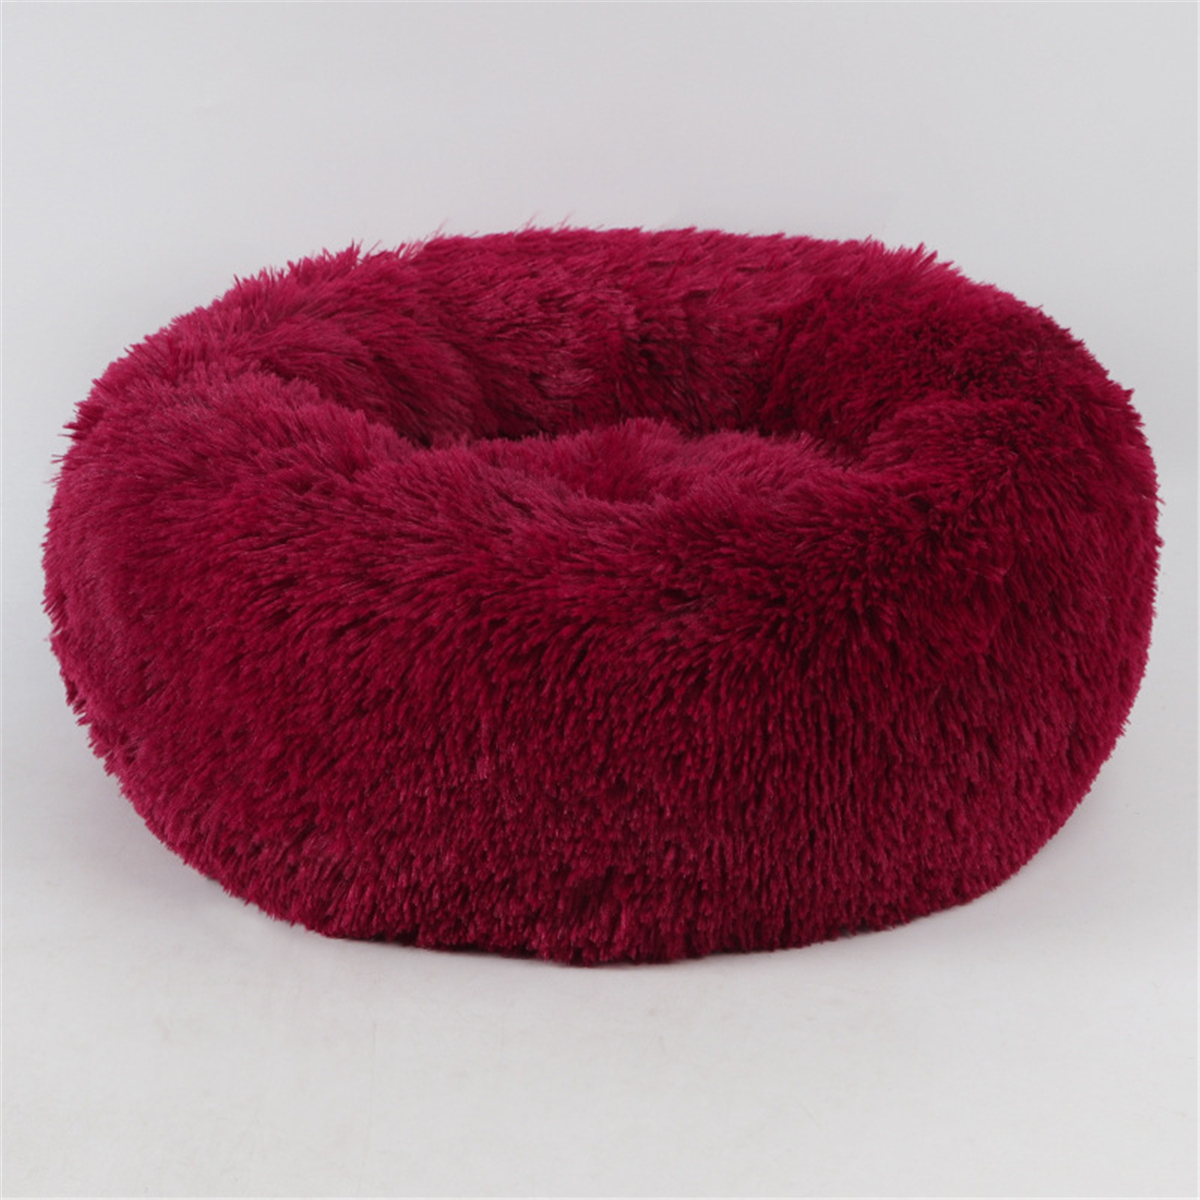 4-Size-Dog-Cat-Round-Bed-Sleeping-Bed-Plush-Pet-Bed-Kennel-Sleeping-Cushion-Puppy-1475650-4